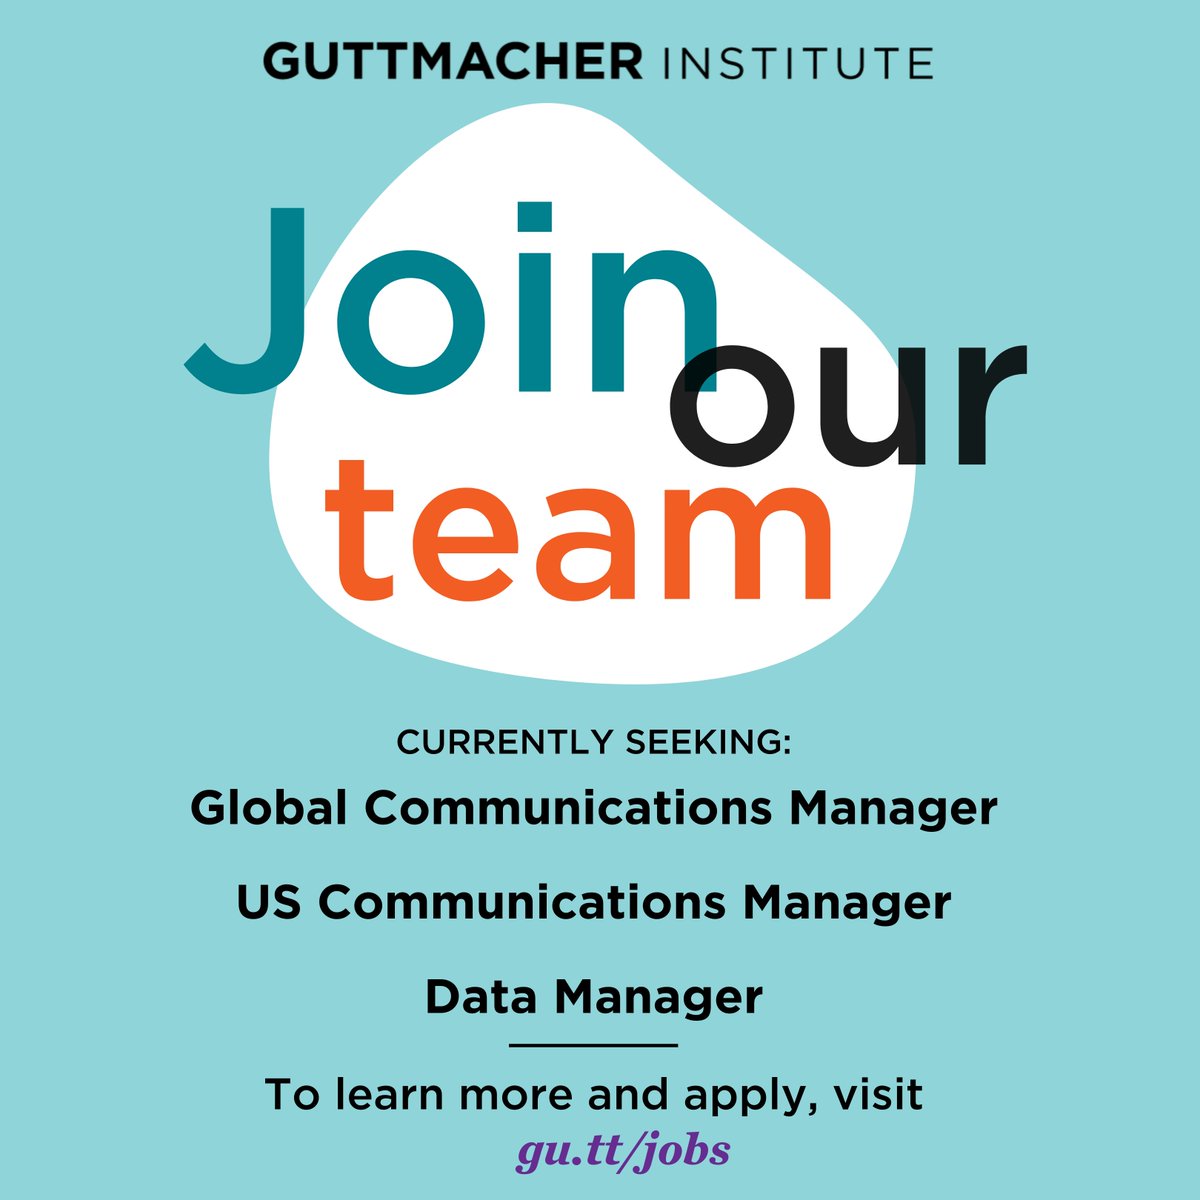 📣 Job opportunities! We are looking for a Global Communications Manager (NYC), US Communications Manager (NYC or DC/ Hybrid) and Data Manager (NYC) to join our team. Learn more & apply! guttmacher.org/about/job-oppo…